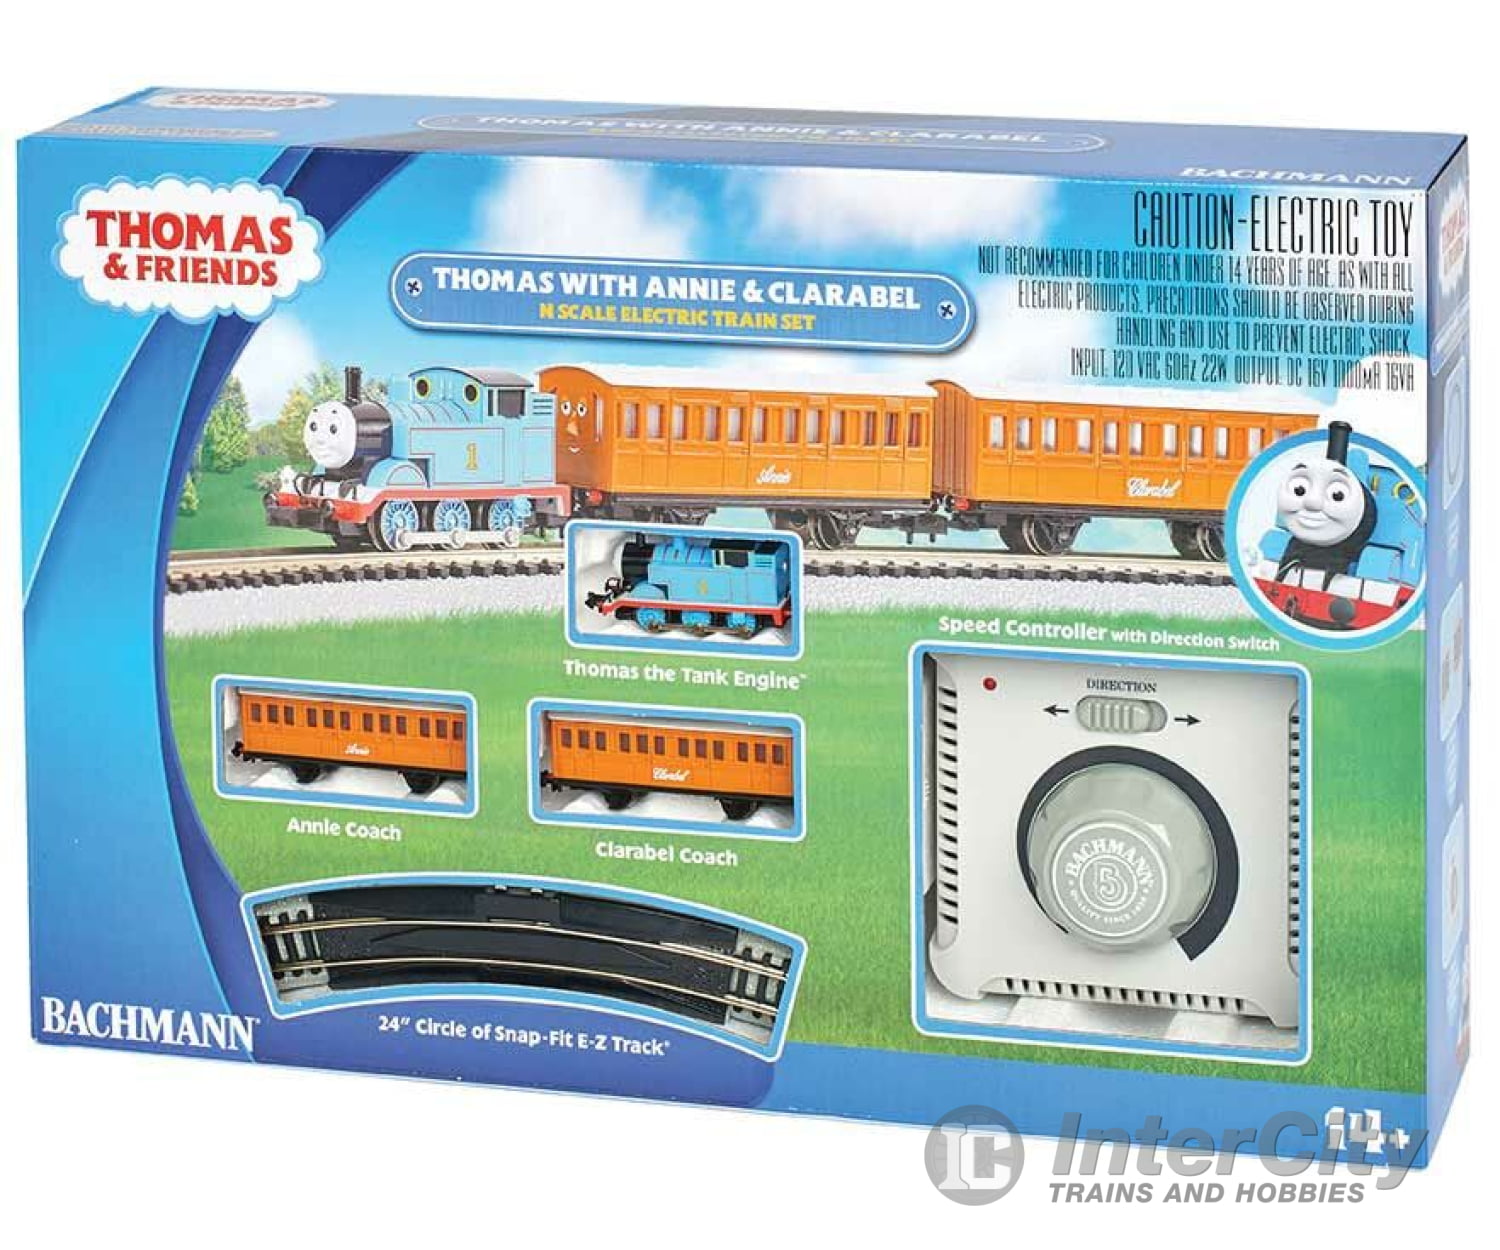 Bachmann 24028 Thomas With Annie And Clarabel Train Set - Standard Dc Friends(Tm -- The Tank Engine